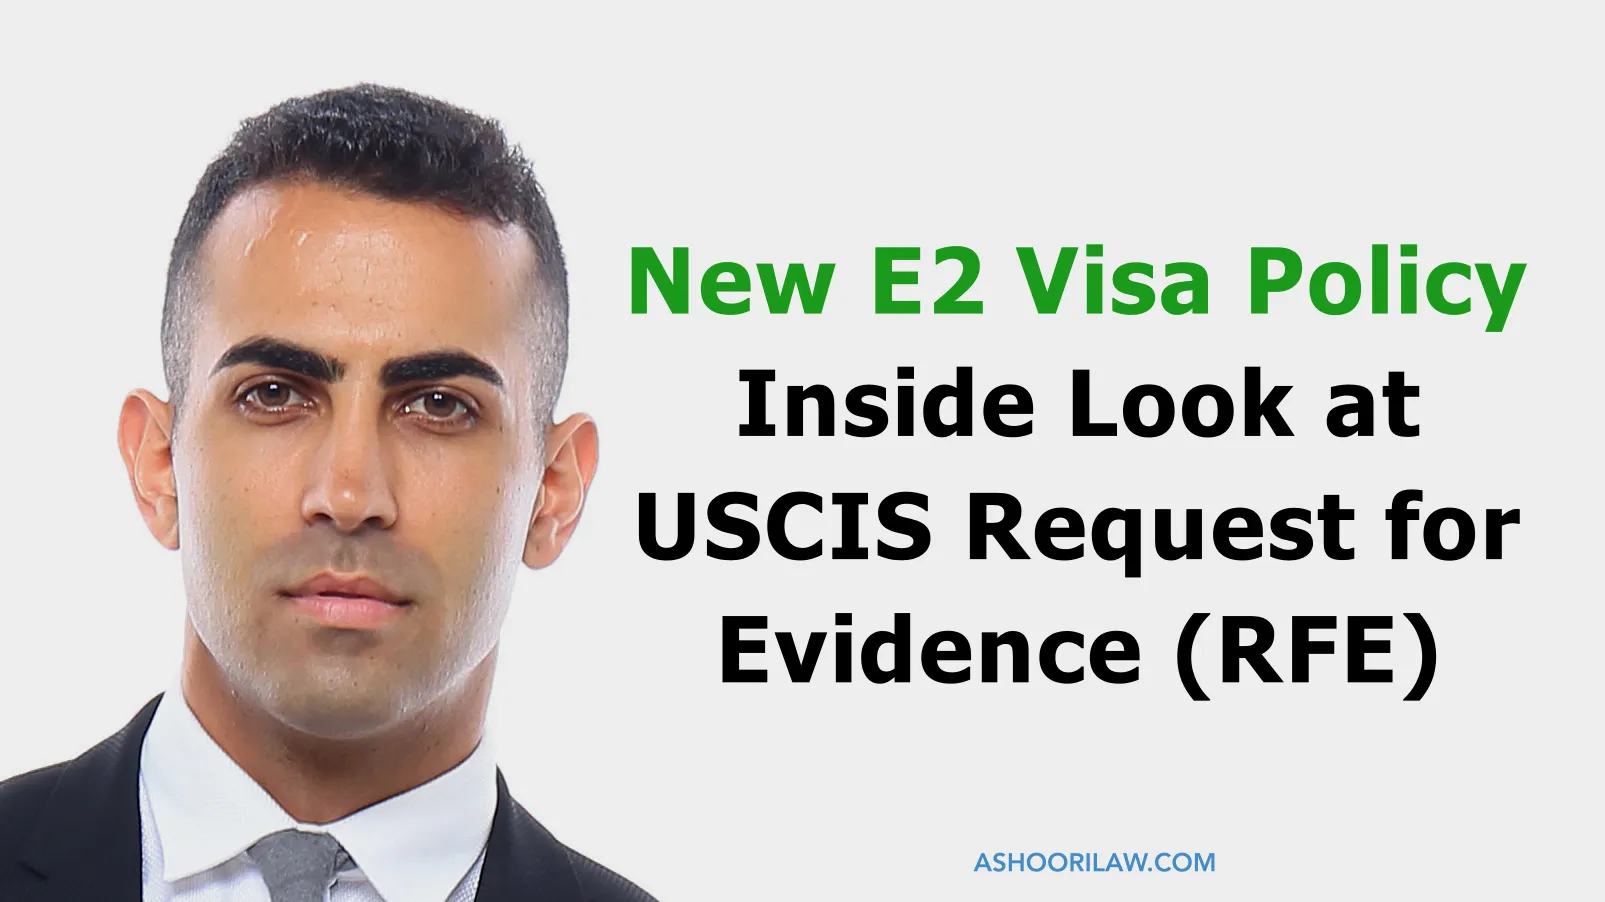 New E2 Visa Policy - Inside Look at USCIS Request for Evidence (RFE)